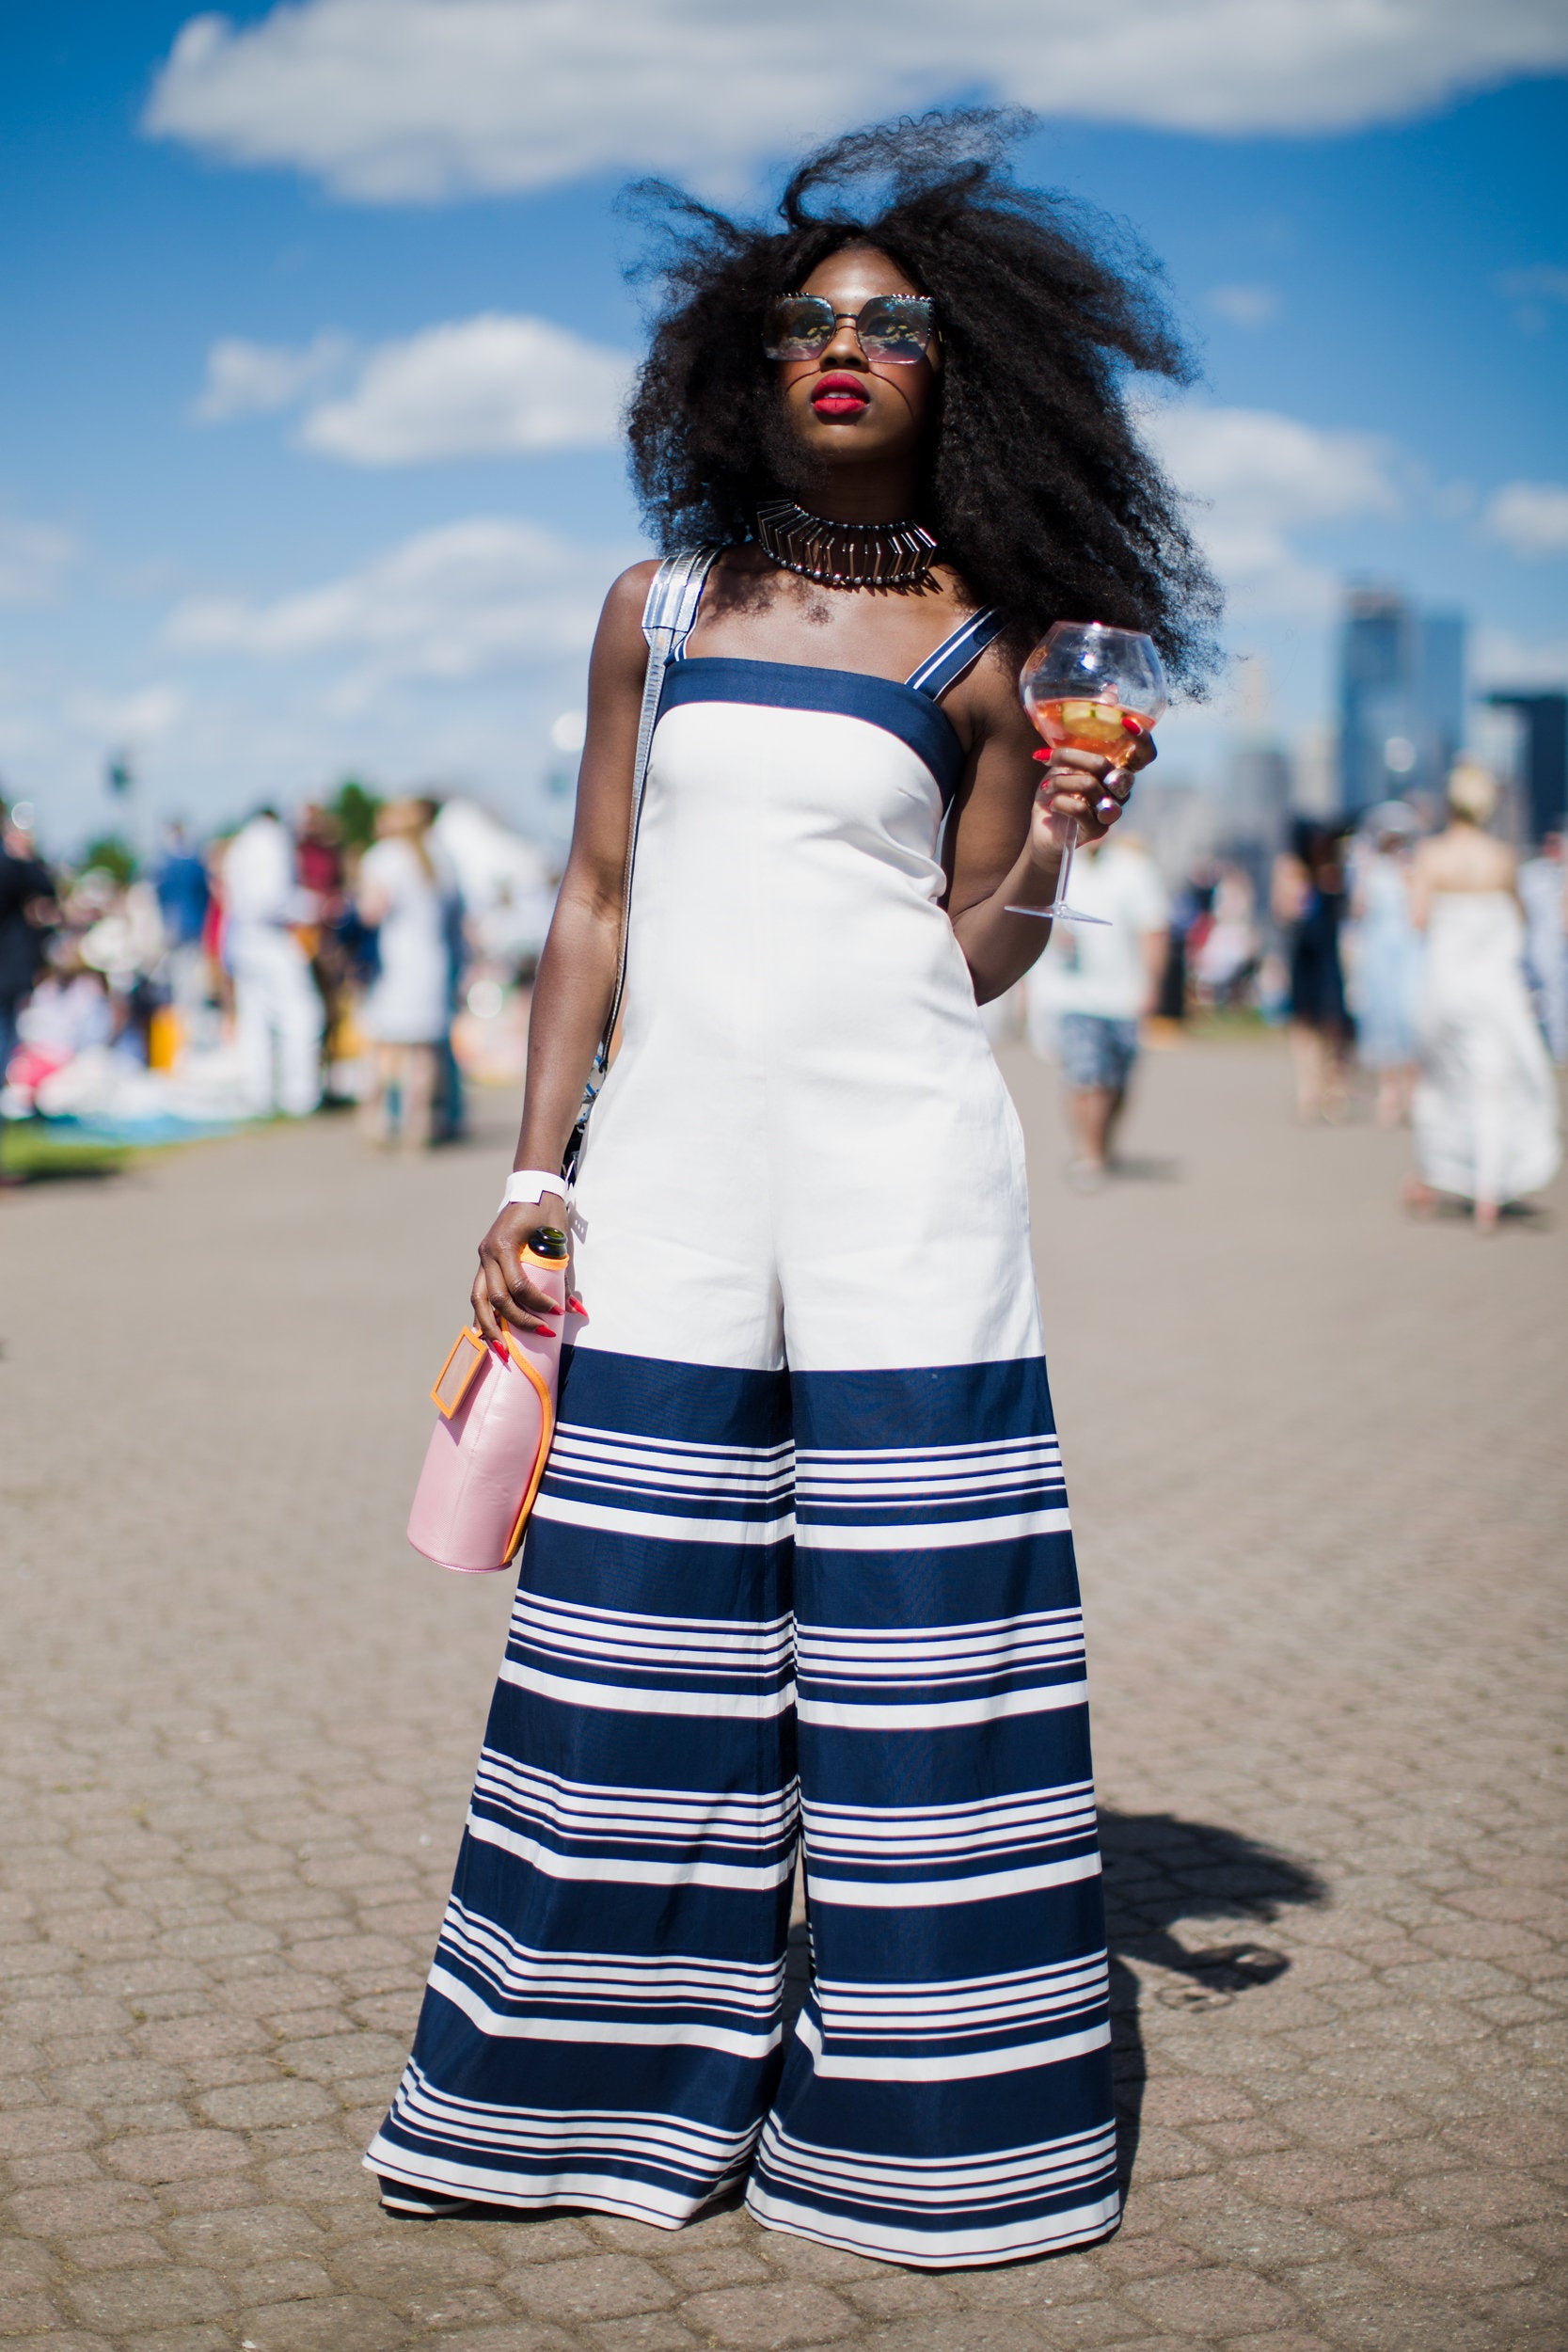 Street Style at the 10th Annual Veuve Clicquot Polo Classic Was On Another Level of Fly
